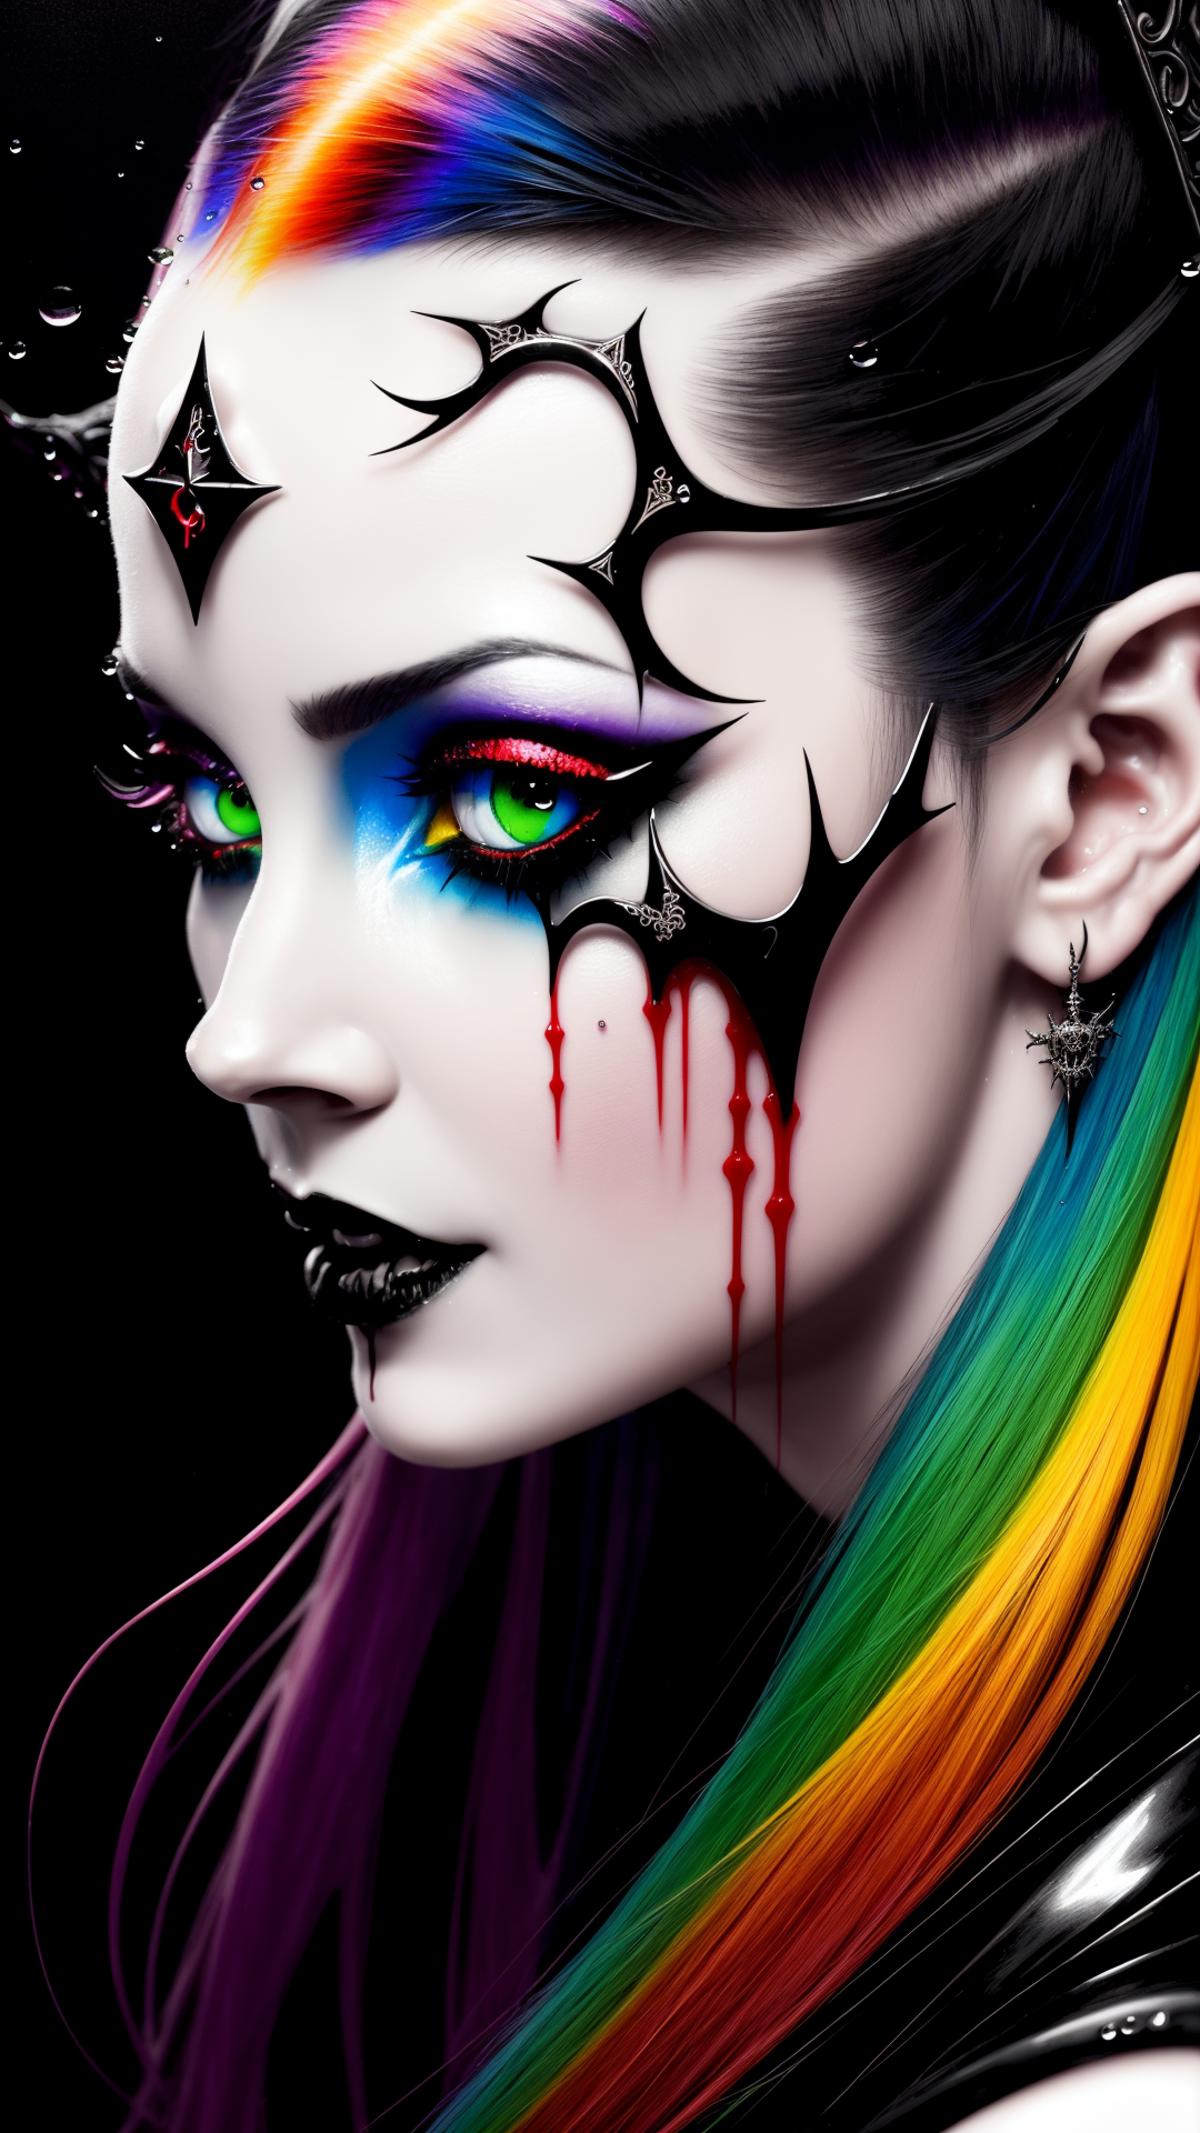 A woman with colorful makeup, including green eyeshadow and blood dripping down her face.